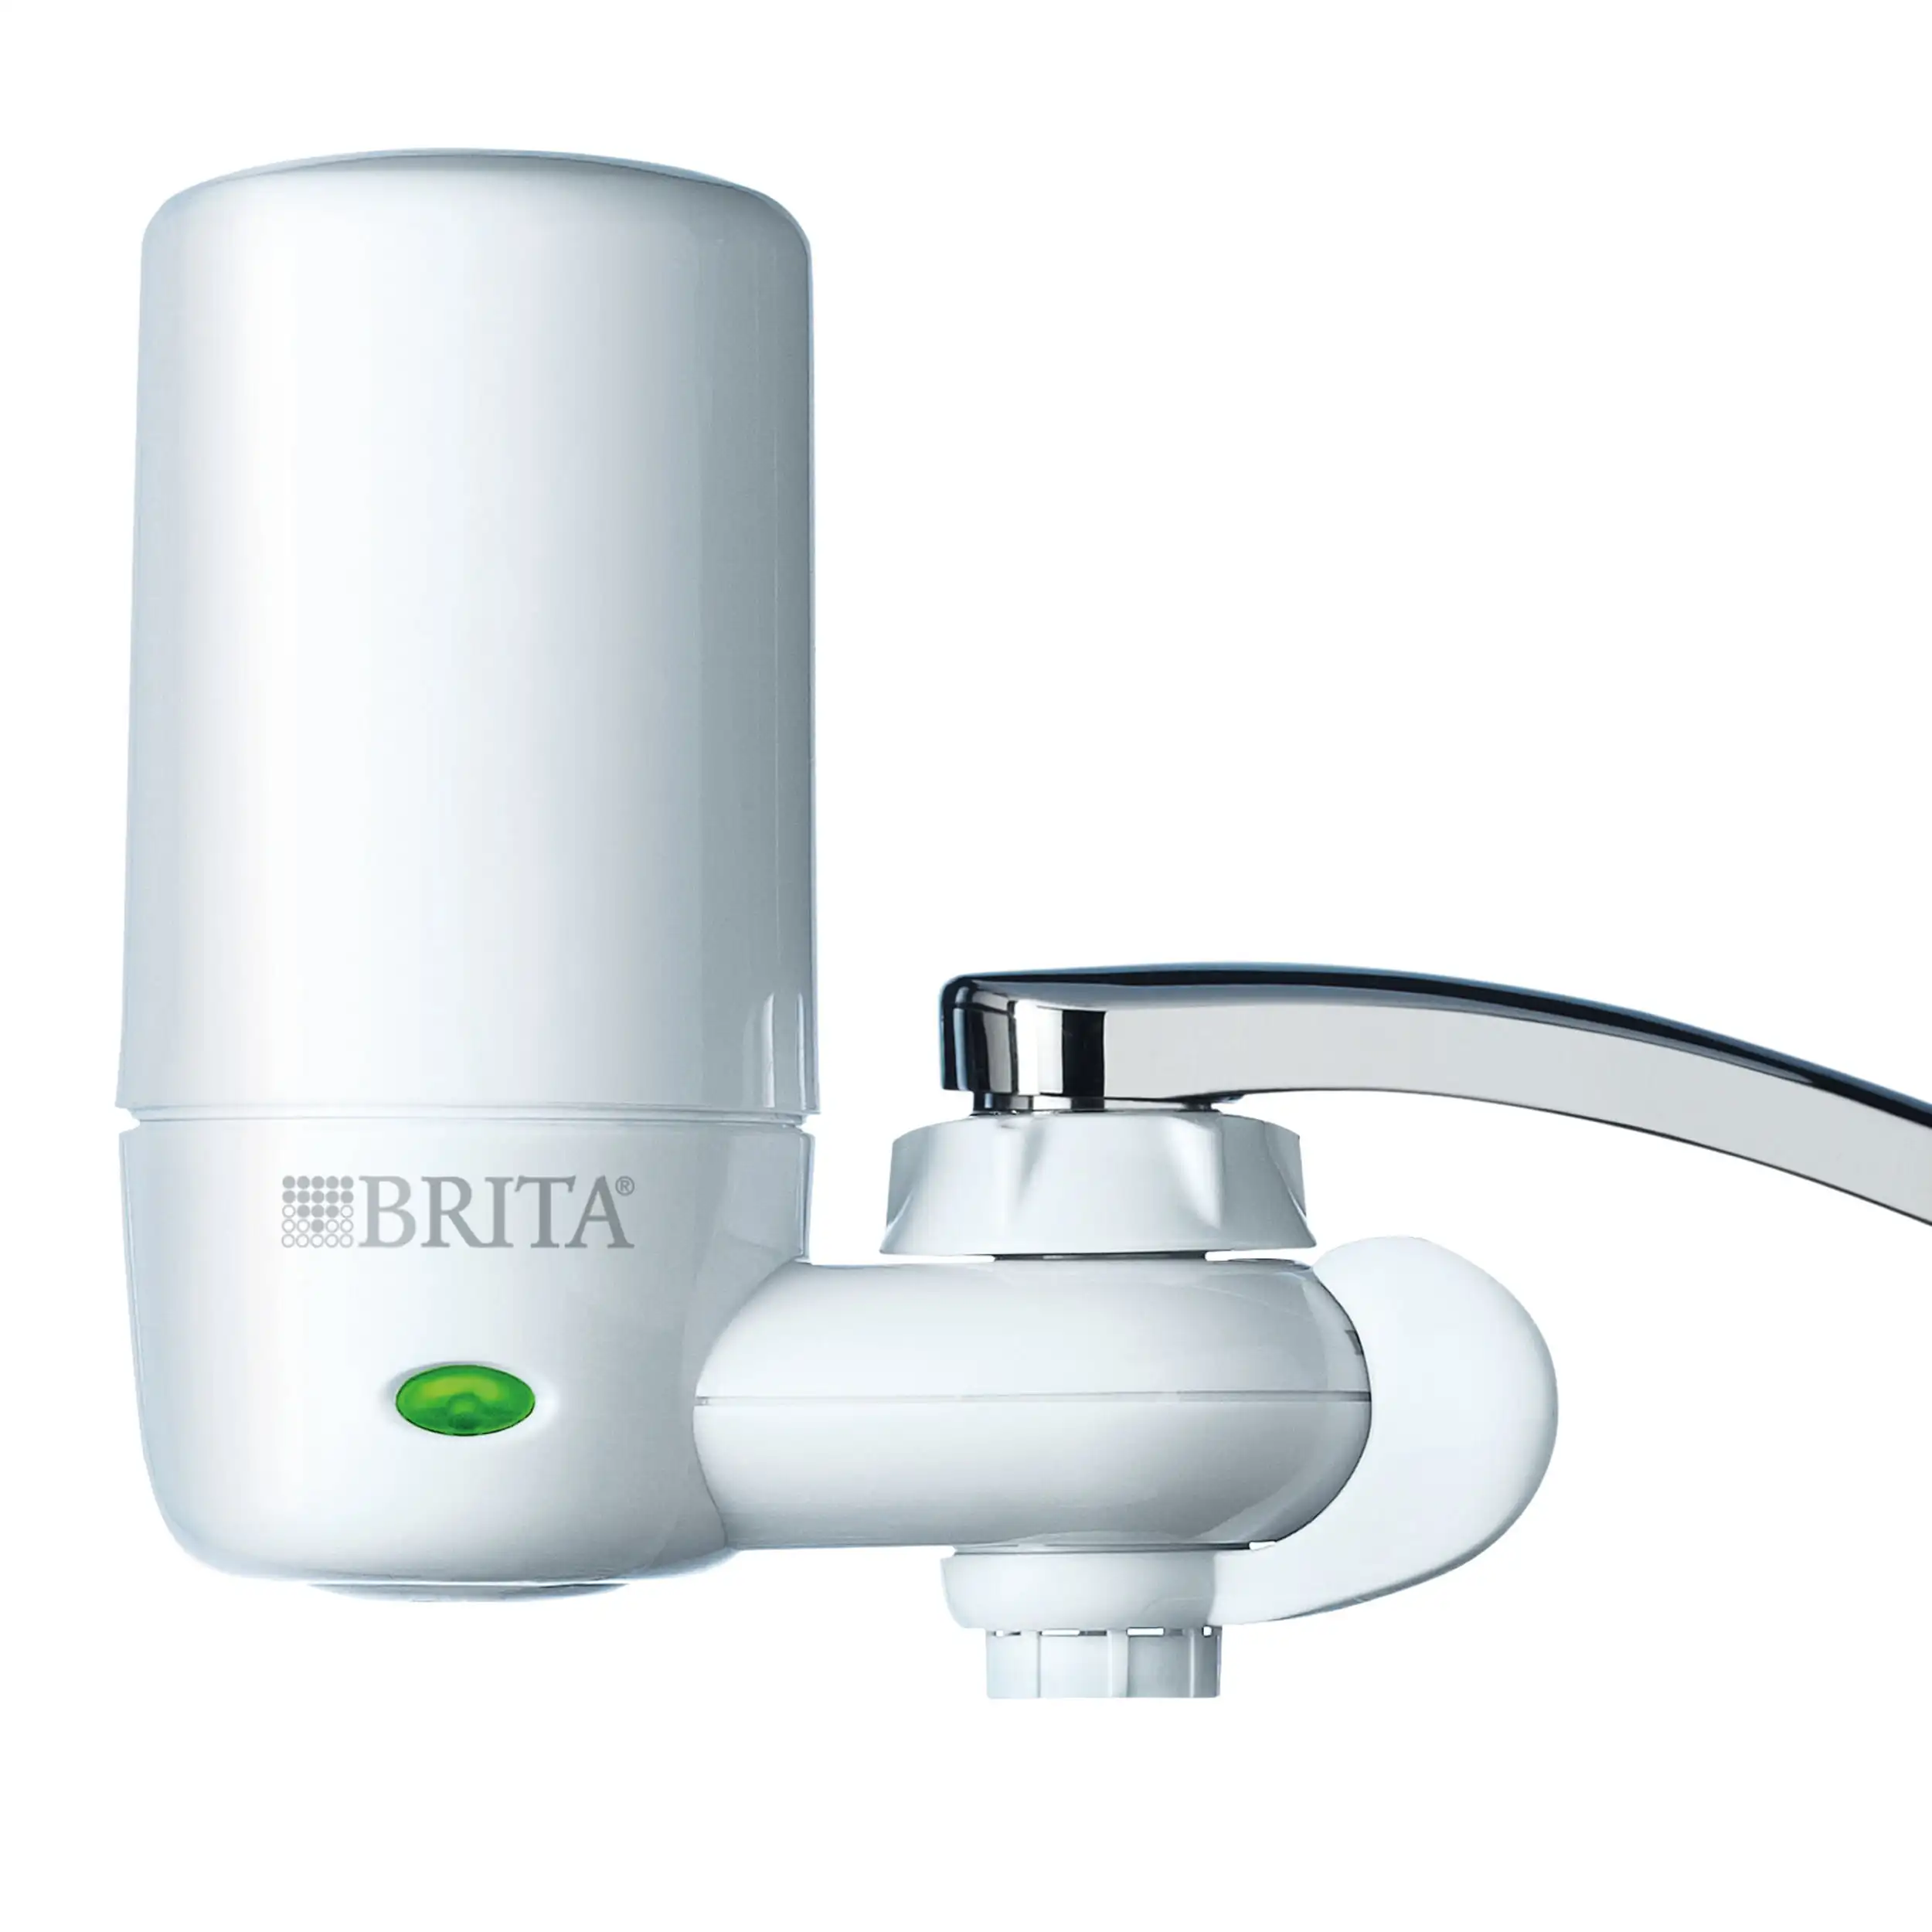 

Brita Tap Water Faucet Filtration System with 2 Filters and Filter Change Remindermodern kitchen faucet